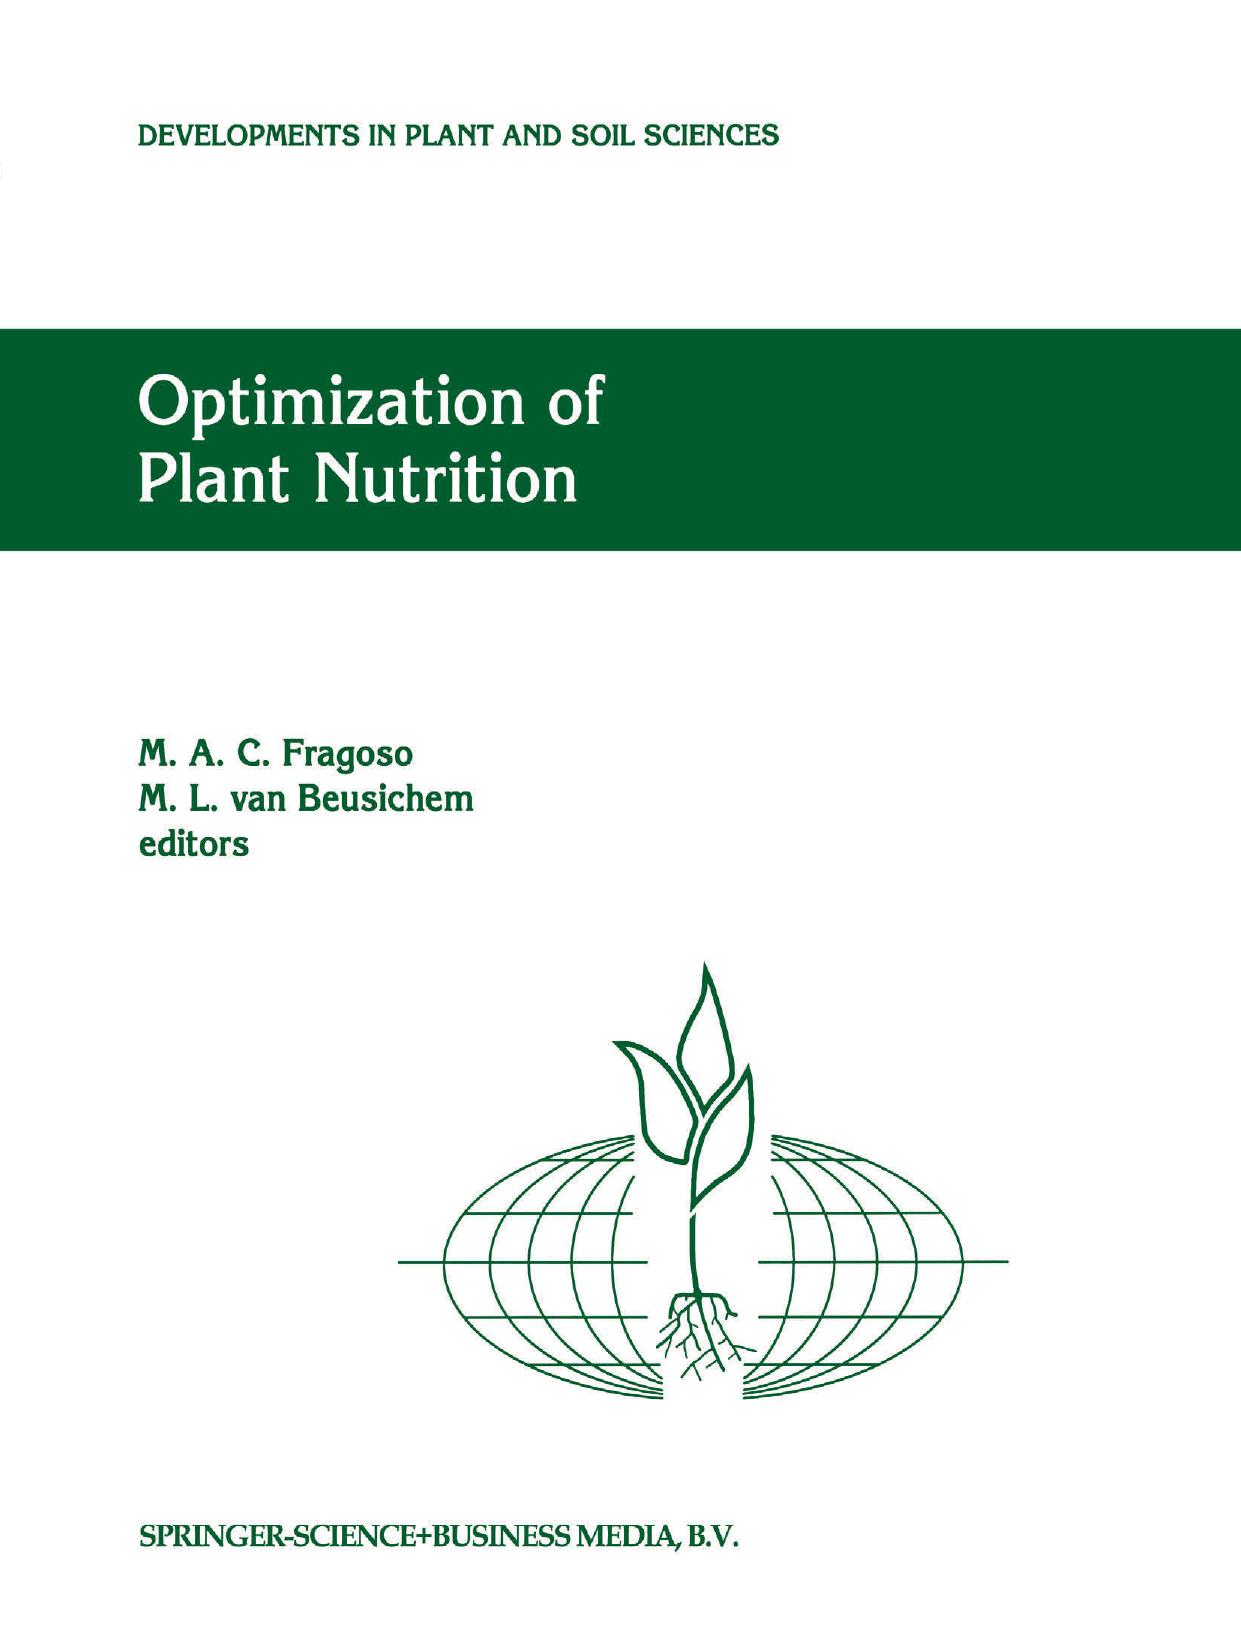 Optimization of Plant Nutrition  Refereed papers from the Eighth International Colloquium for the Optimization of Plant Nutrition, 31 August – 8 September 1992, Lisbon, Portu